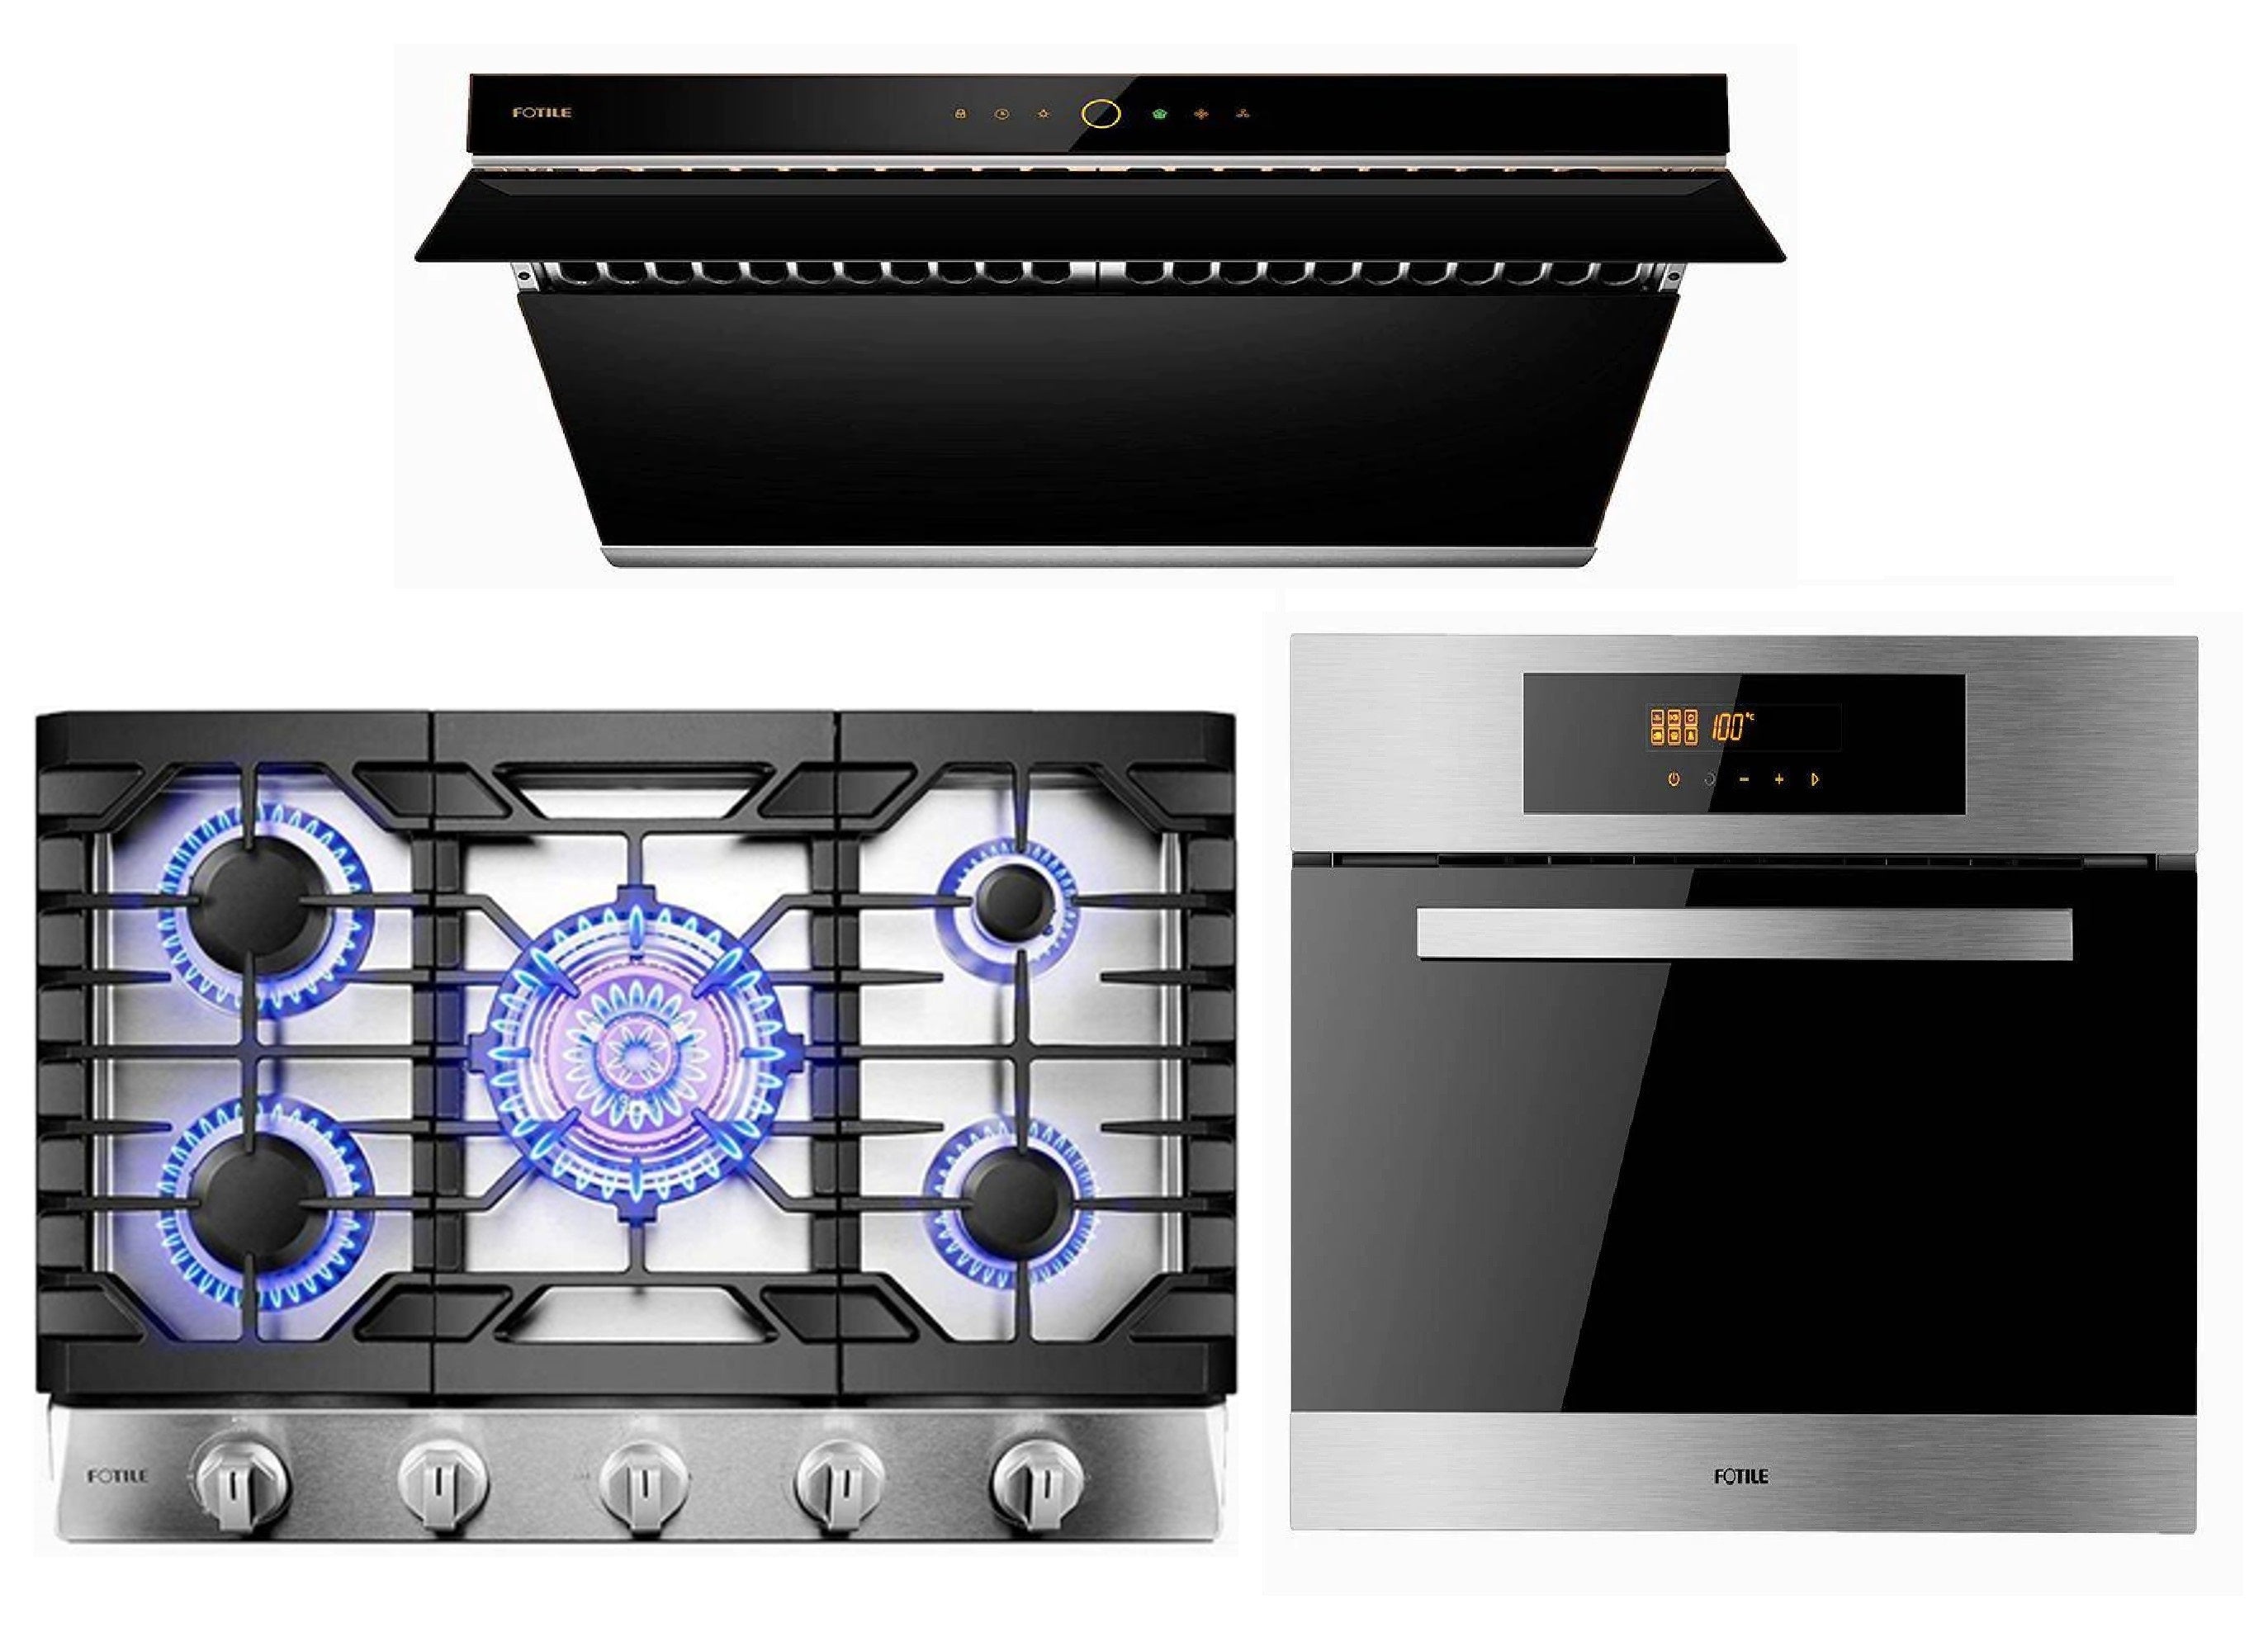 Fotile Tri-Ring 36 in. GAS Cooktop in Stainless Steel with 5 Burners Including Flame Failure Device, Silver